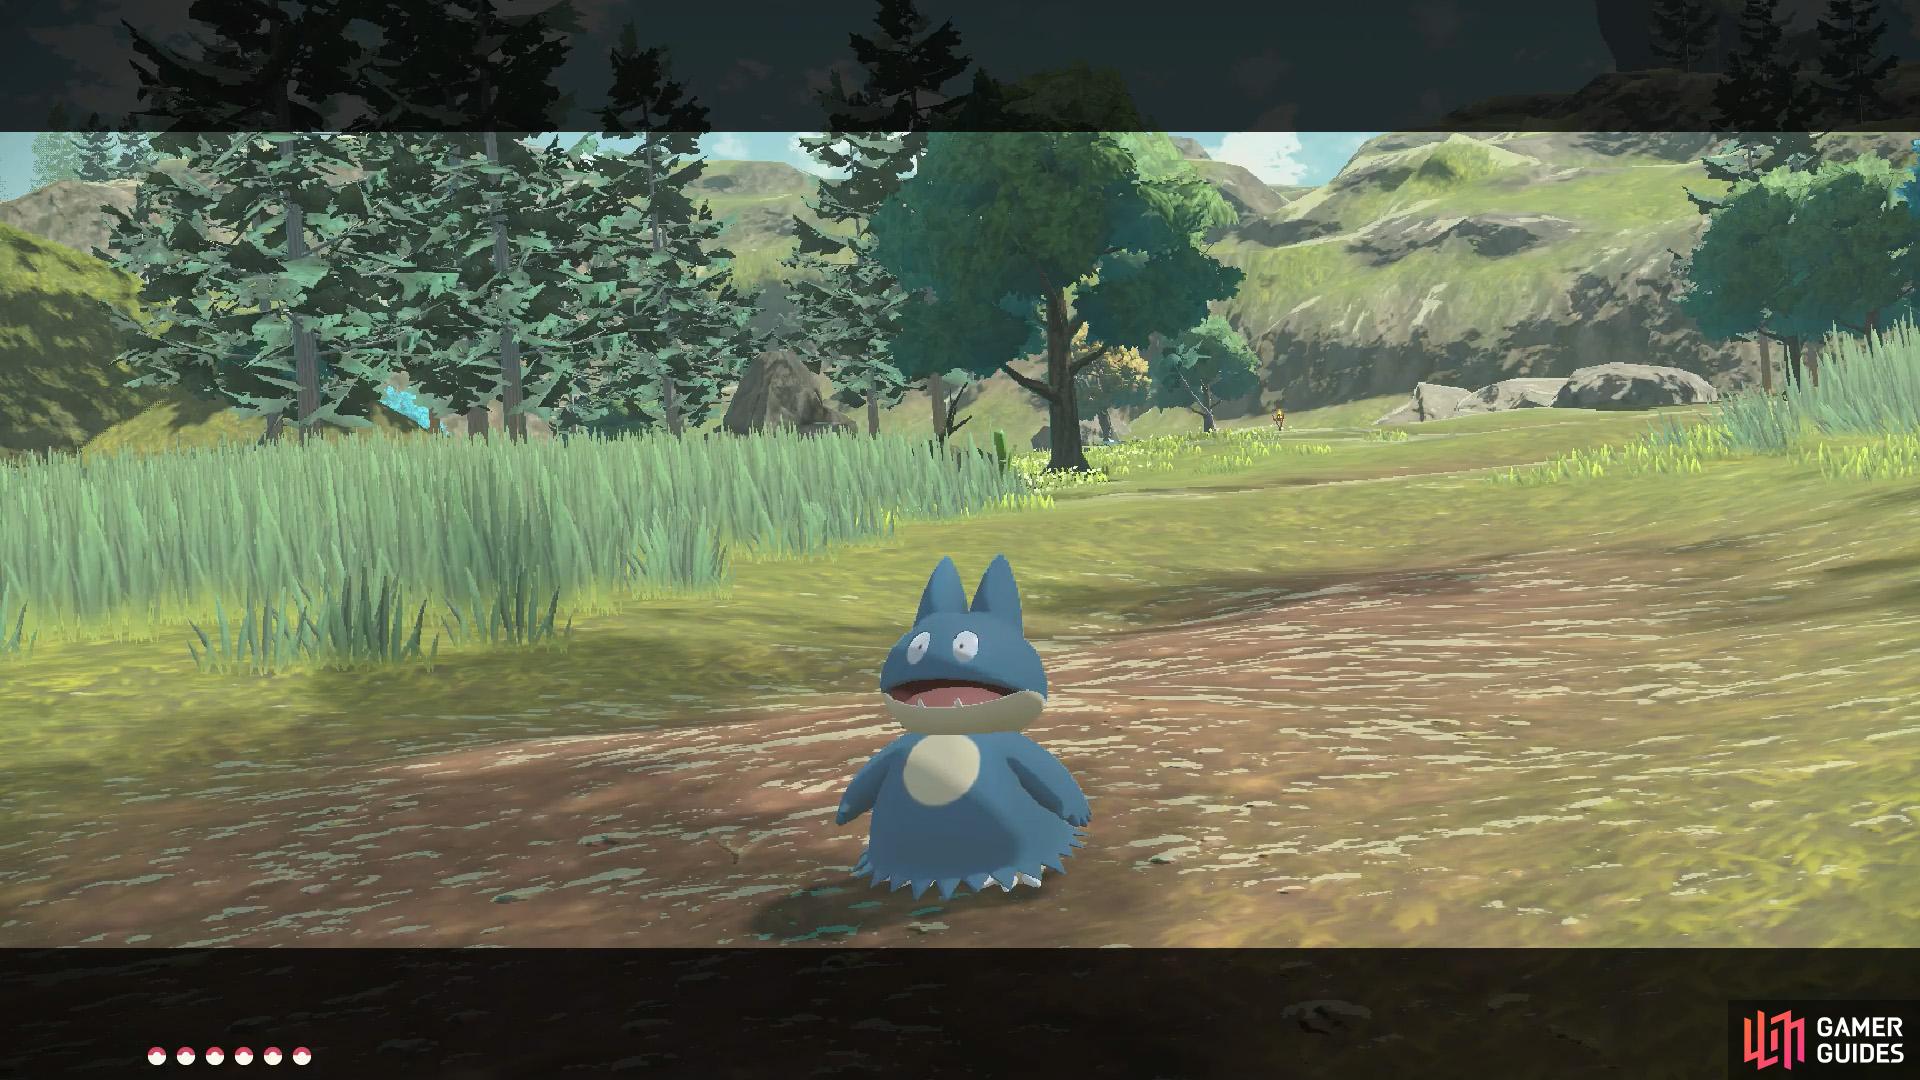 Mai's partner is Munchlax, a baby Snorlax.